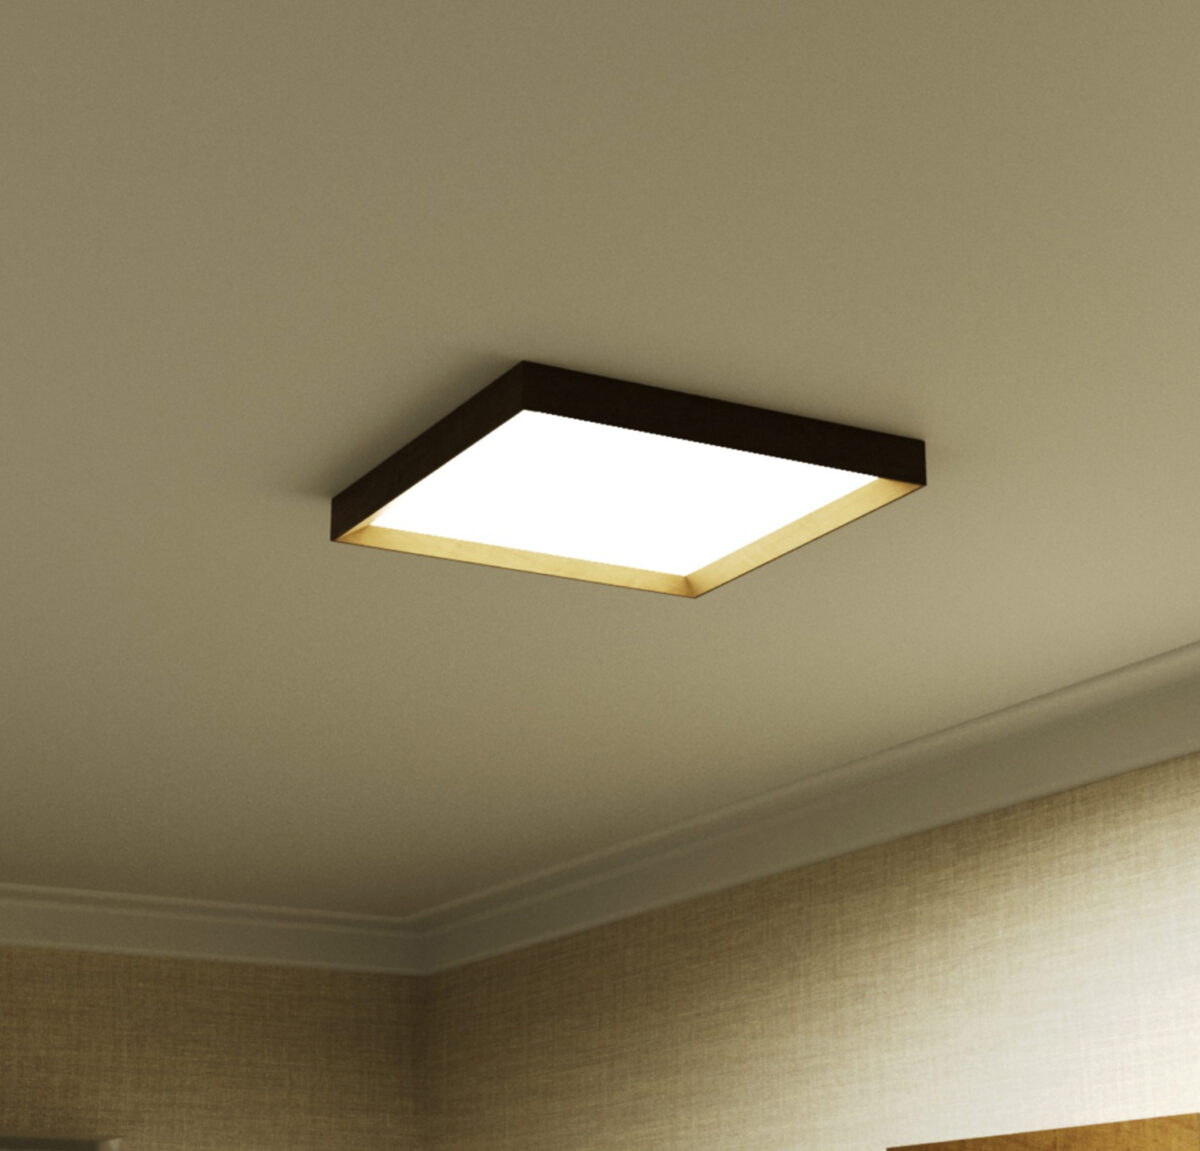 Wooden lamp LED panel 60x60 cm Slim FLORENCE ceiling lamp housing natural wood Armstrong type cassette